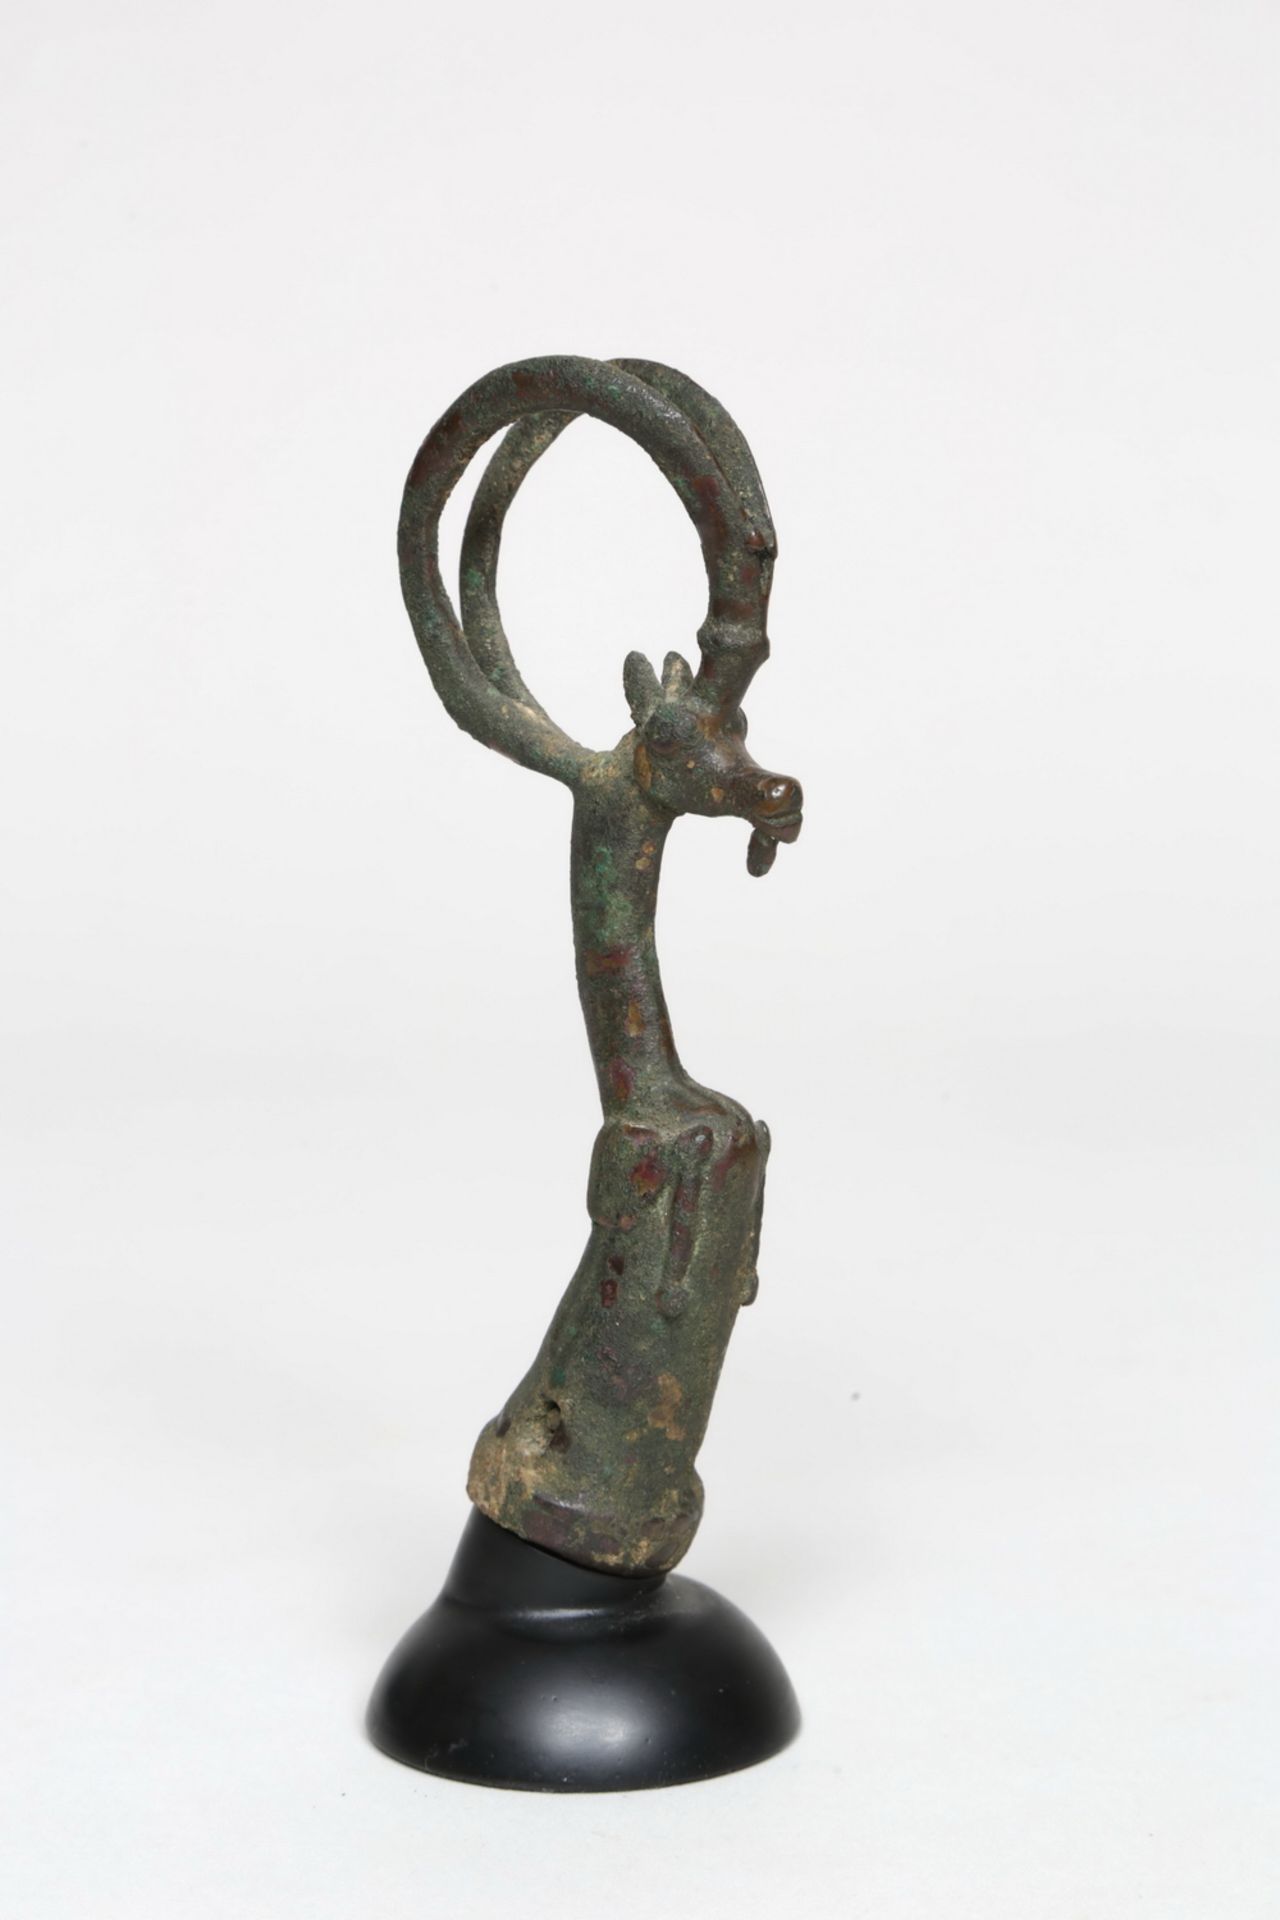 Luristan, bronze handle depicting a dear head, 1000-700 BC. - Image 2 of 3